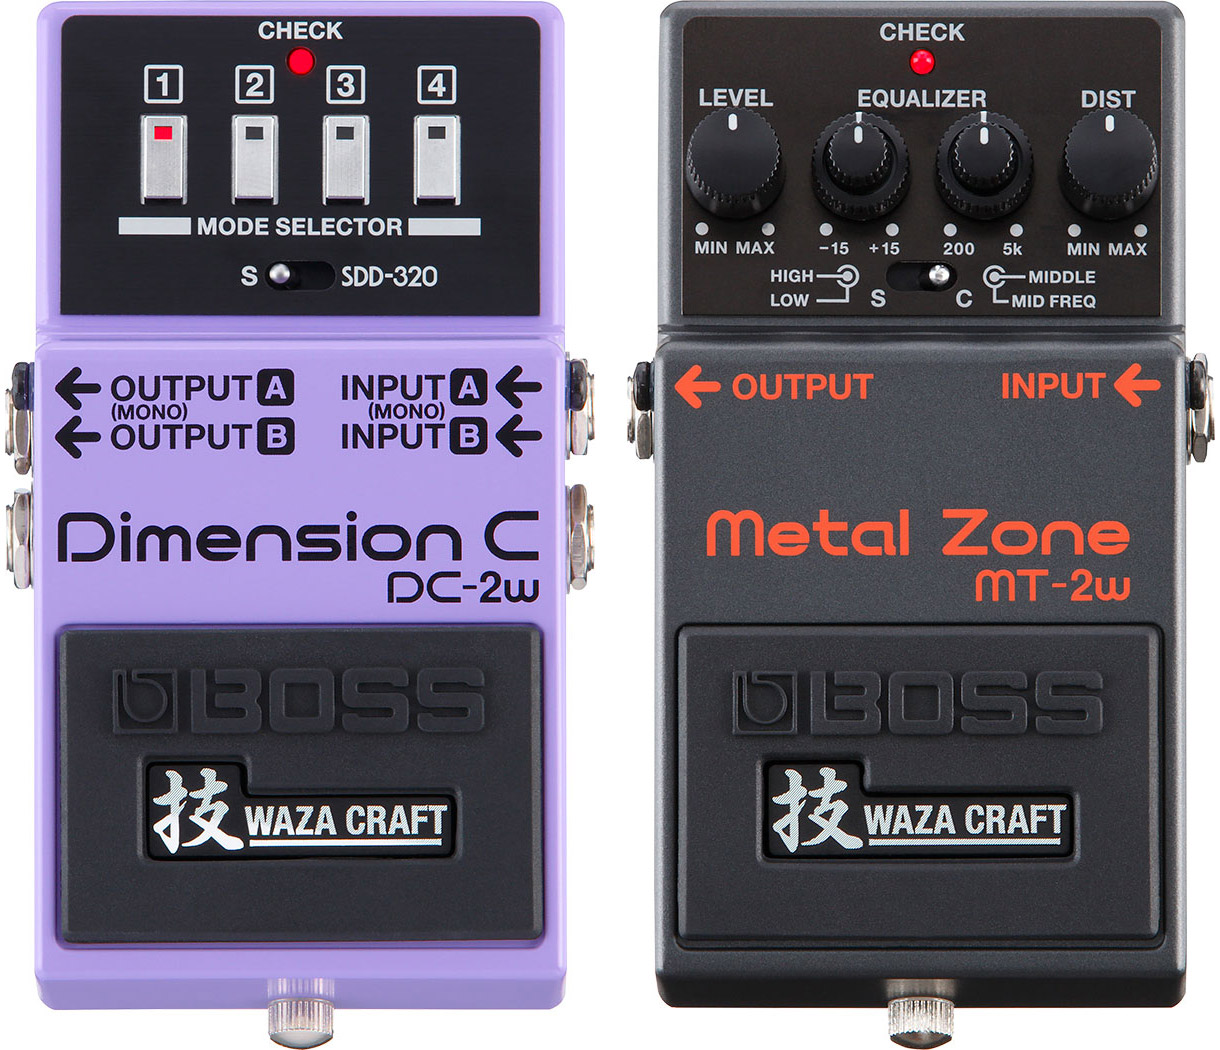 Boss Introduces DC-2W Dimension C and MT-2W Metal Zone Pedals – No